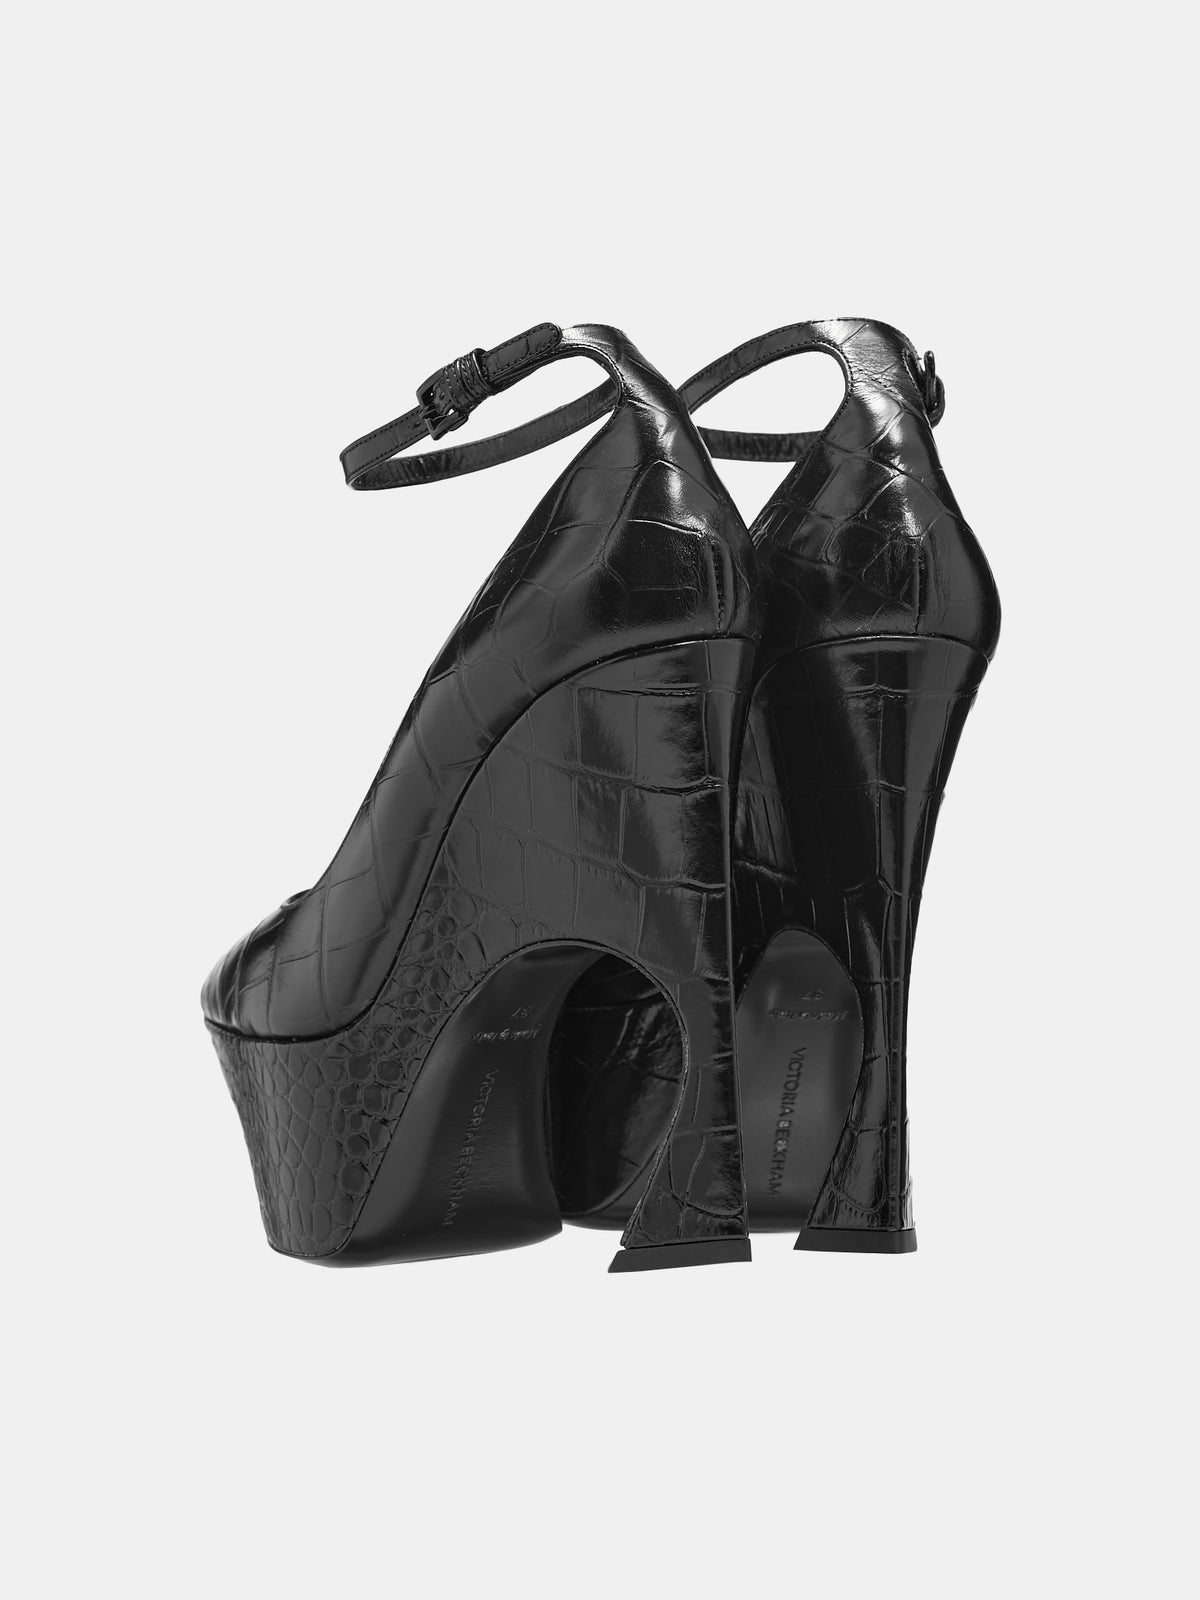 Ankle Strap Wedge Pump (BE41200A-18100-BLACK)